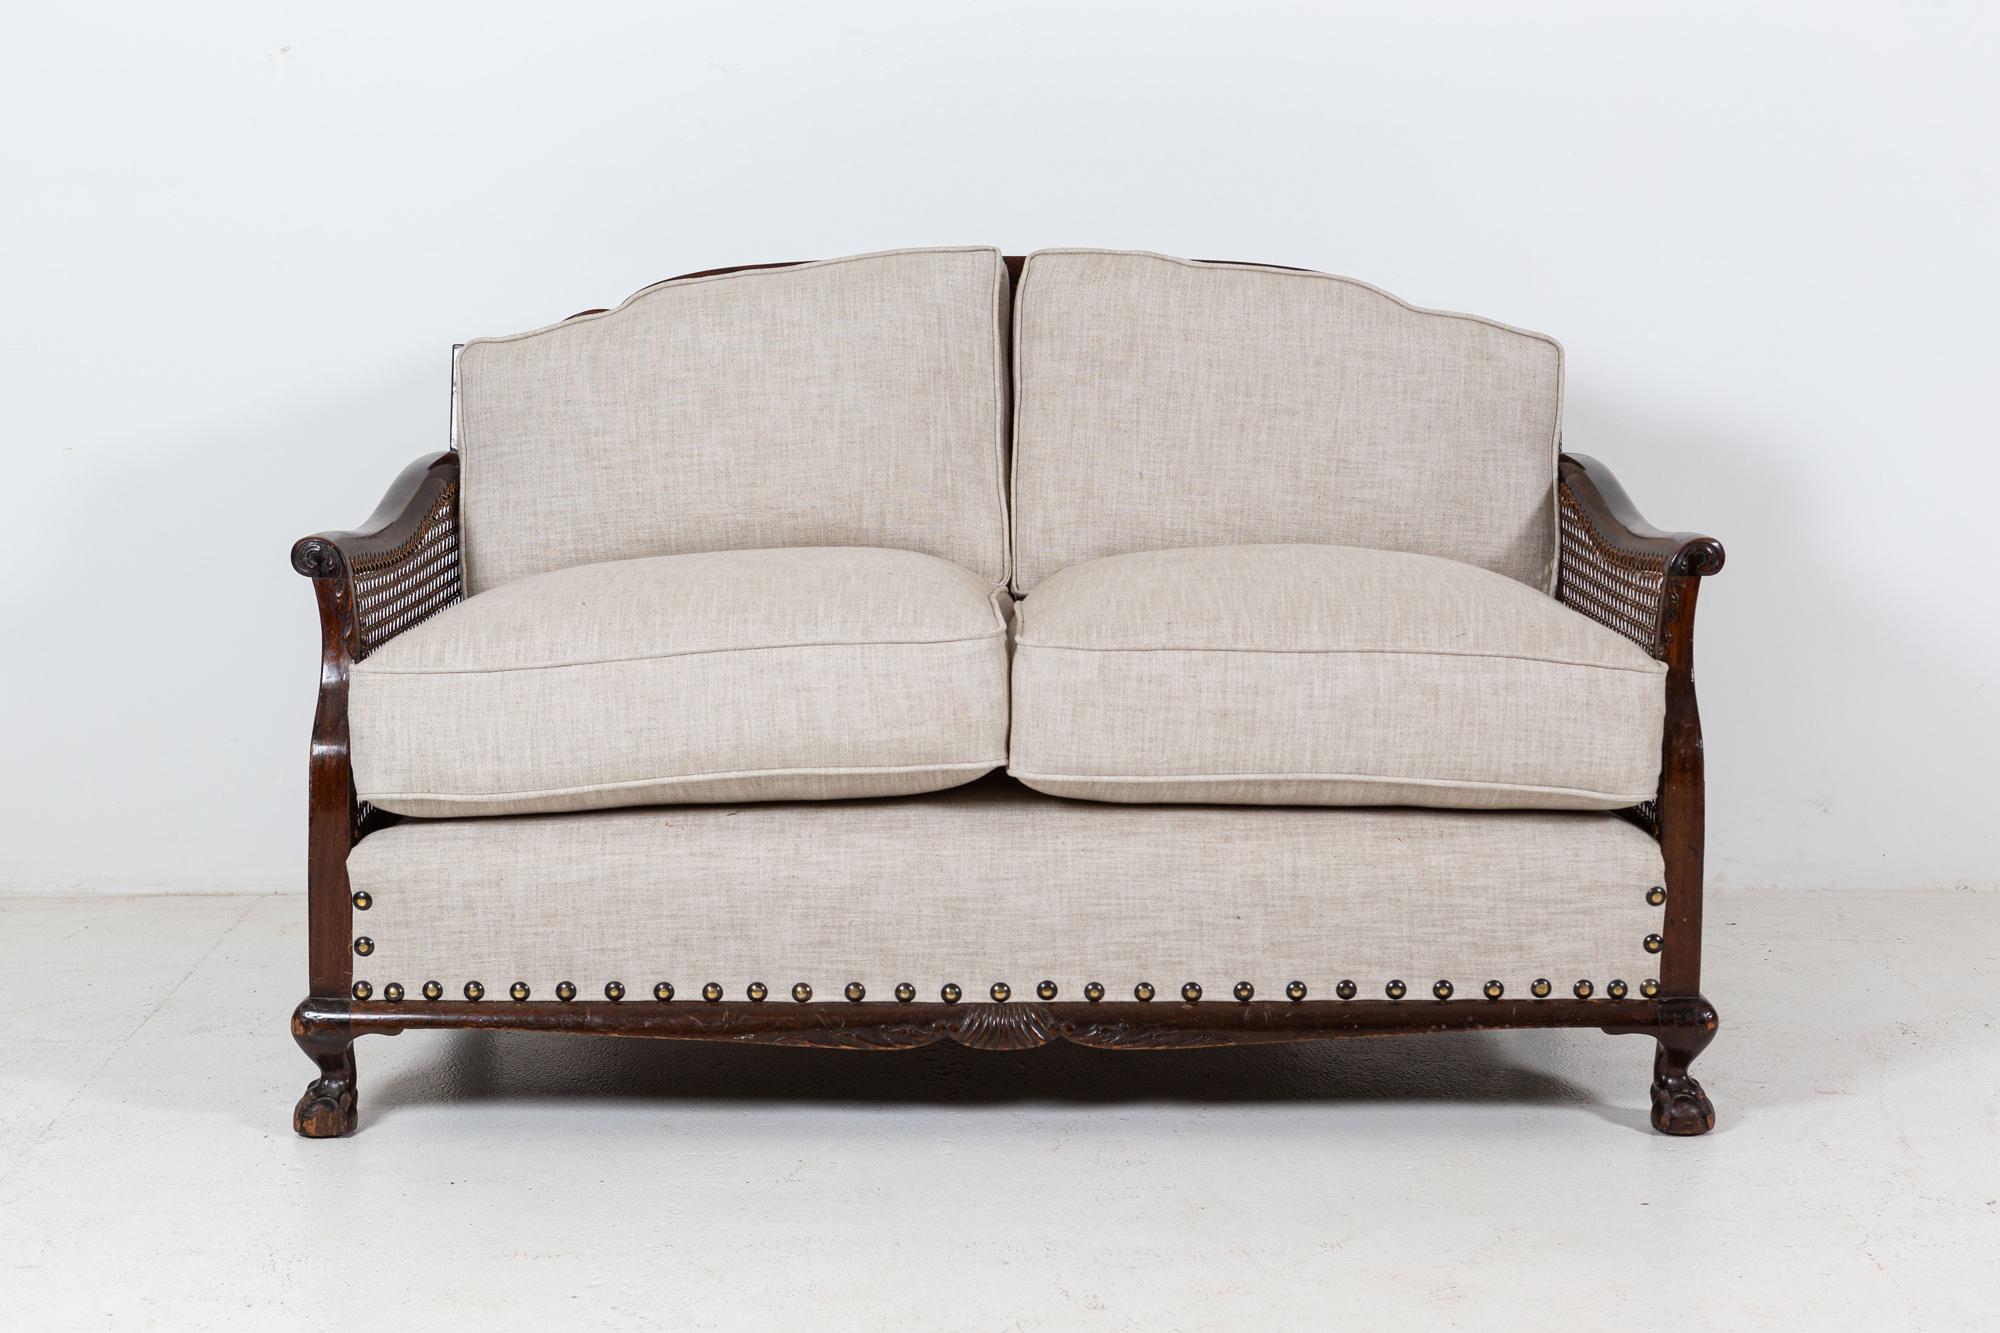 Circa 1930

1930’s English mahogany bergere suite.

Reupholstered in linen with foam core feather wrap cushions

 

Measures: Sofa W140 x D76 x H83 cm

Armchairs W66 x D76 x H80 cm.